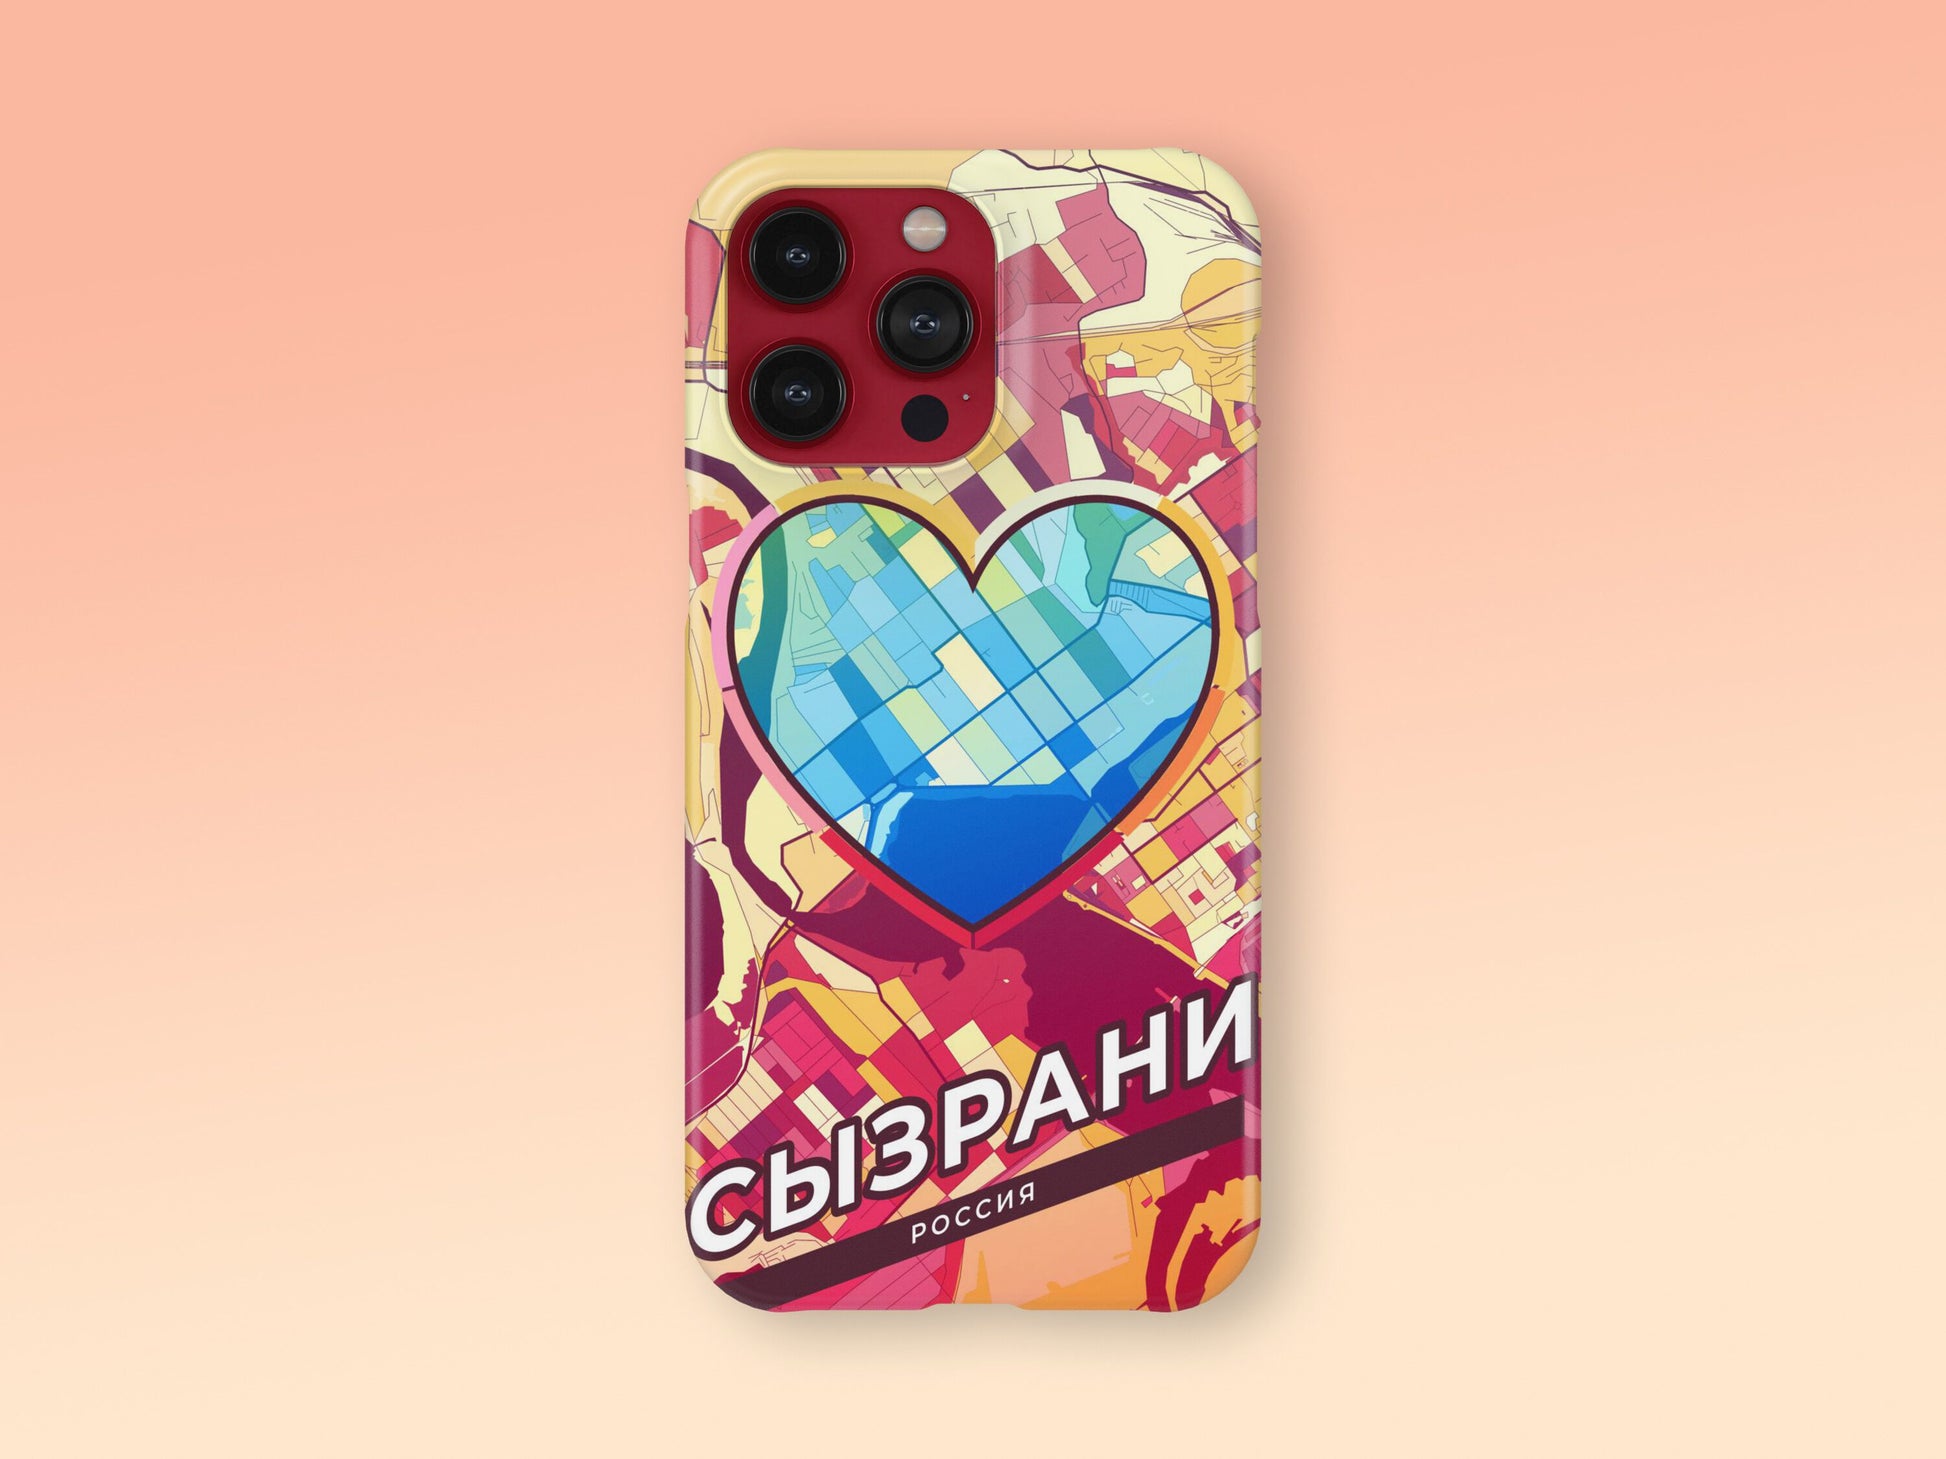 Syzran Russia slim phone case with colorful icon 2